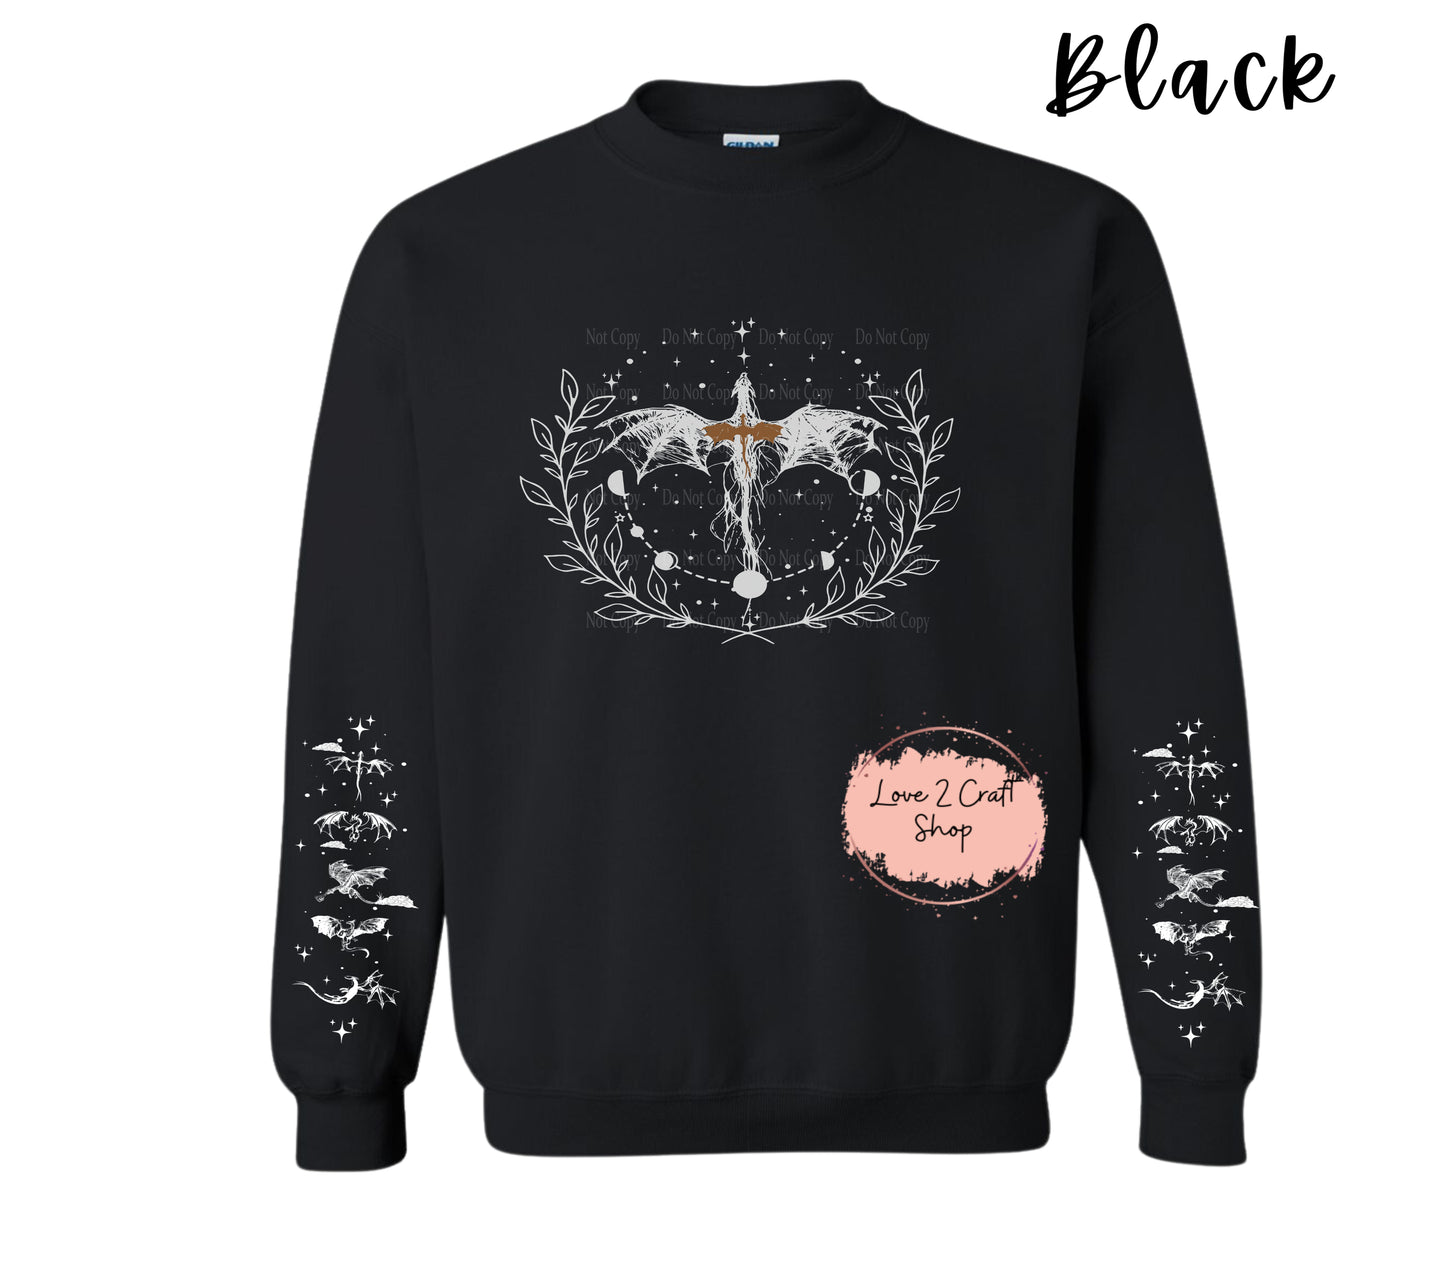 Fourth Wing with Sleeve images Crewneck